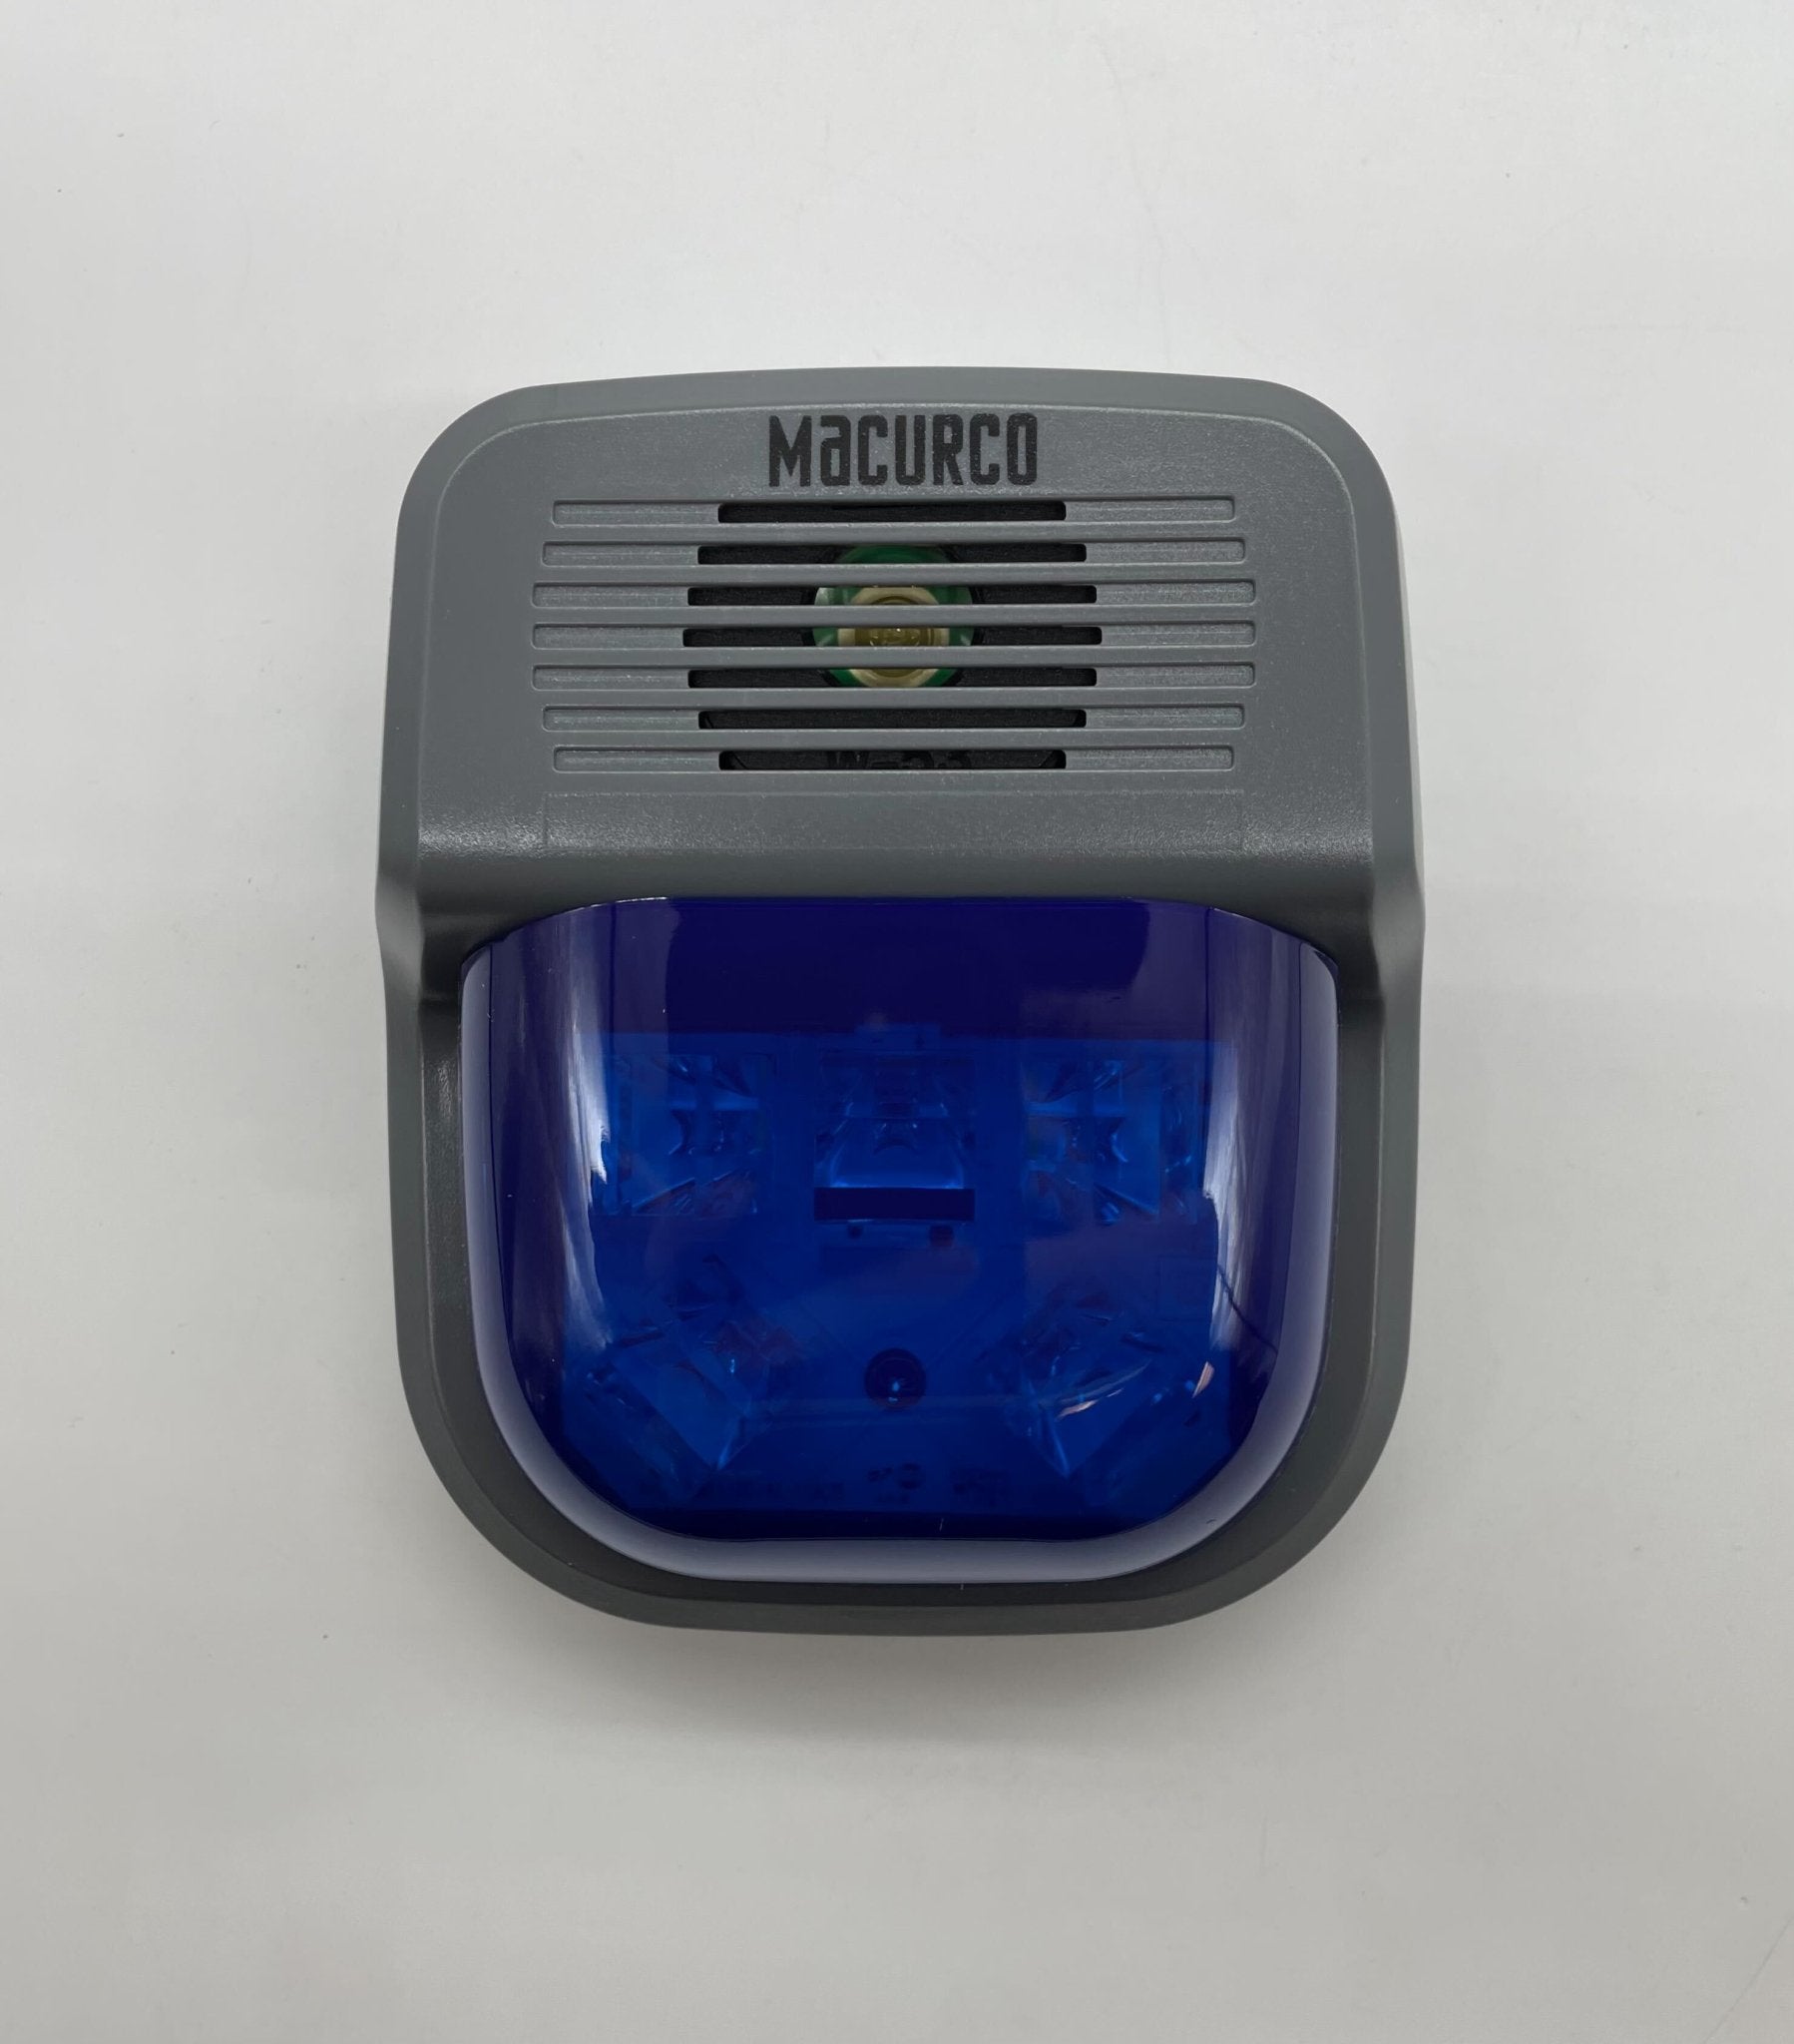 Macurco HS-B - The Fire Alarm Supplier